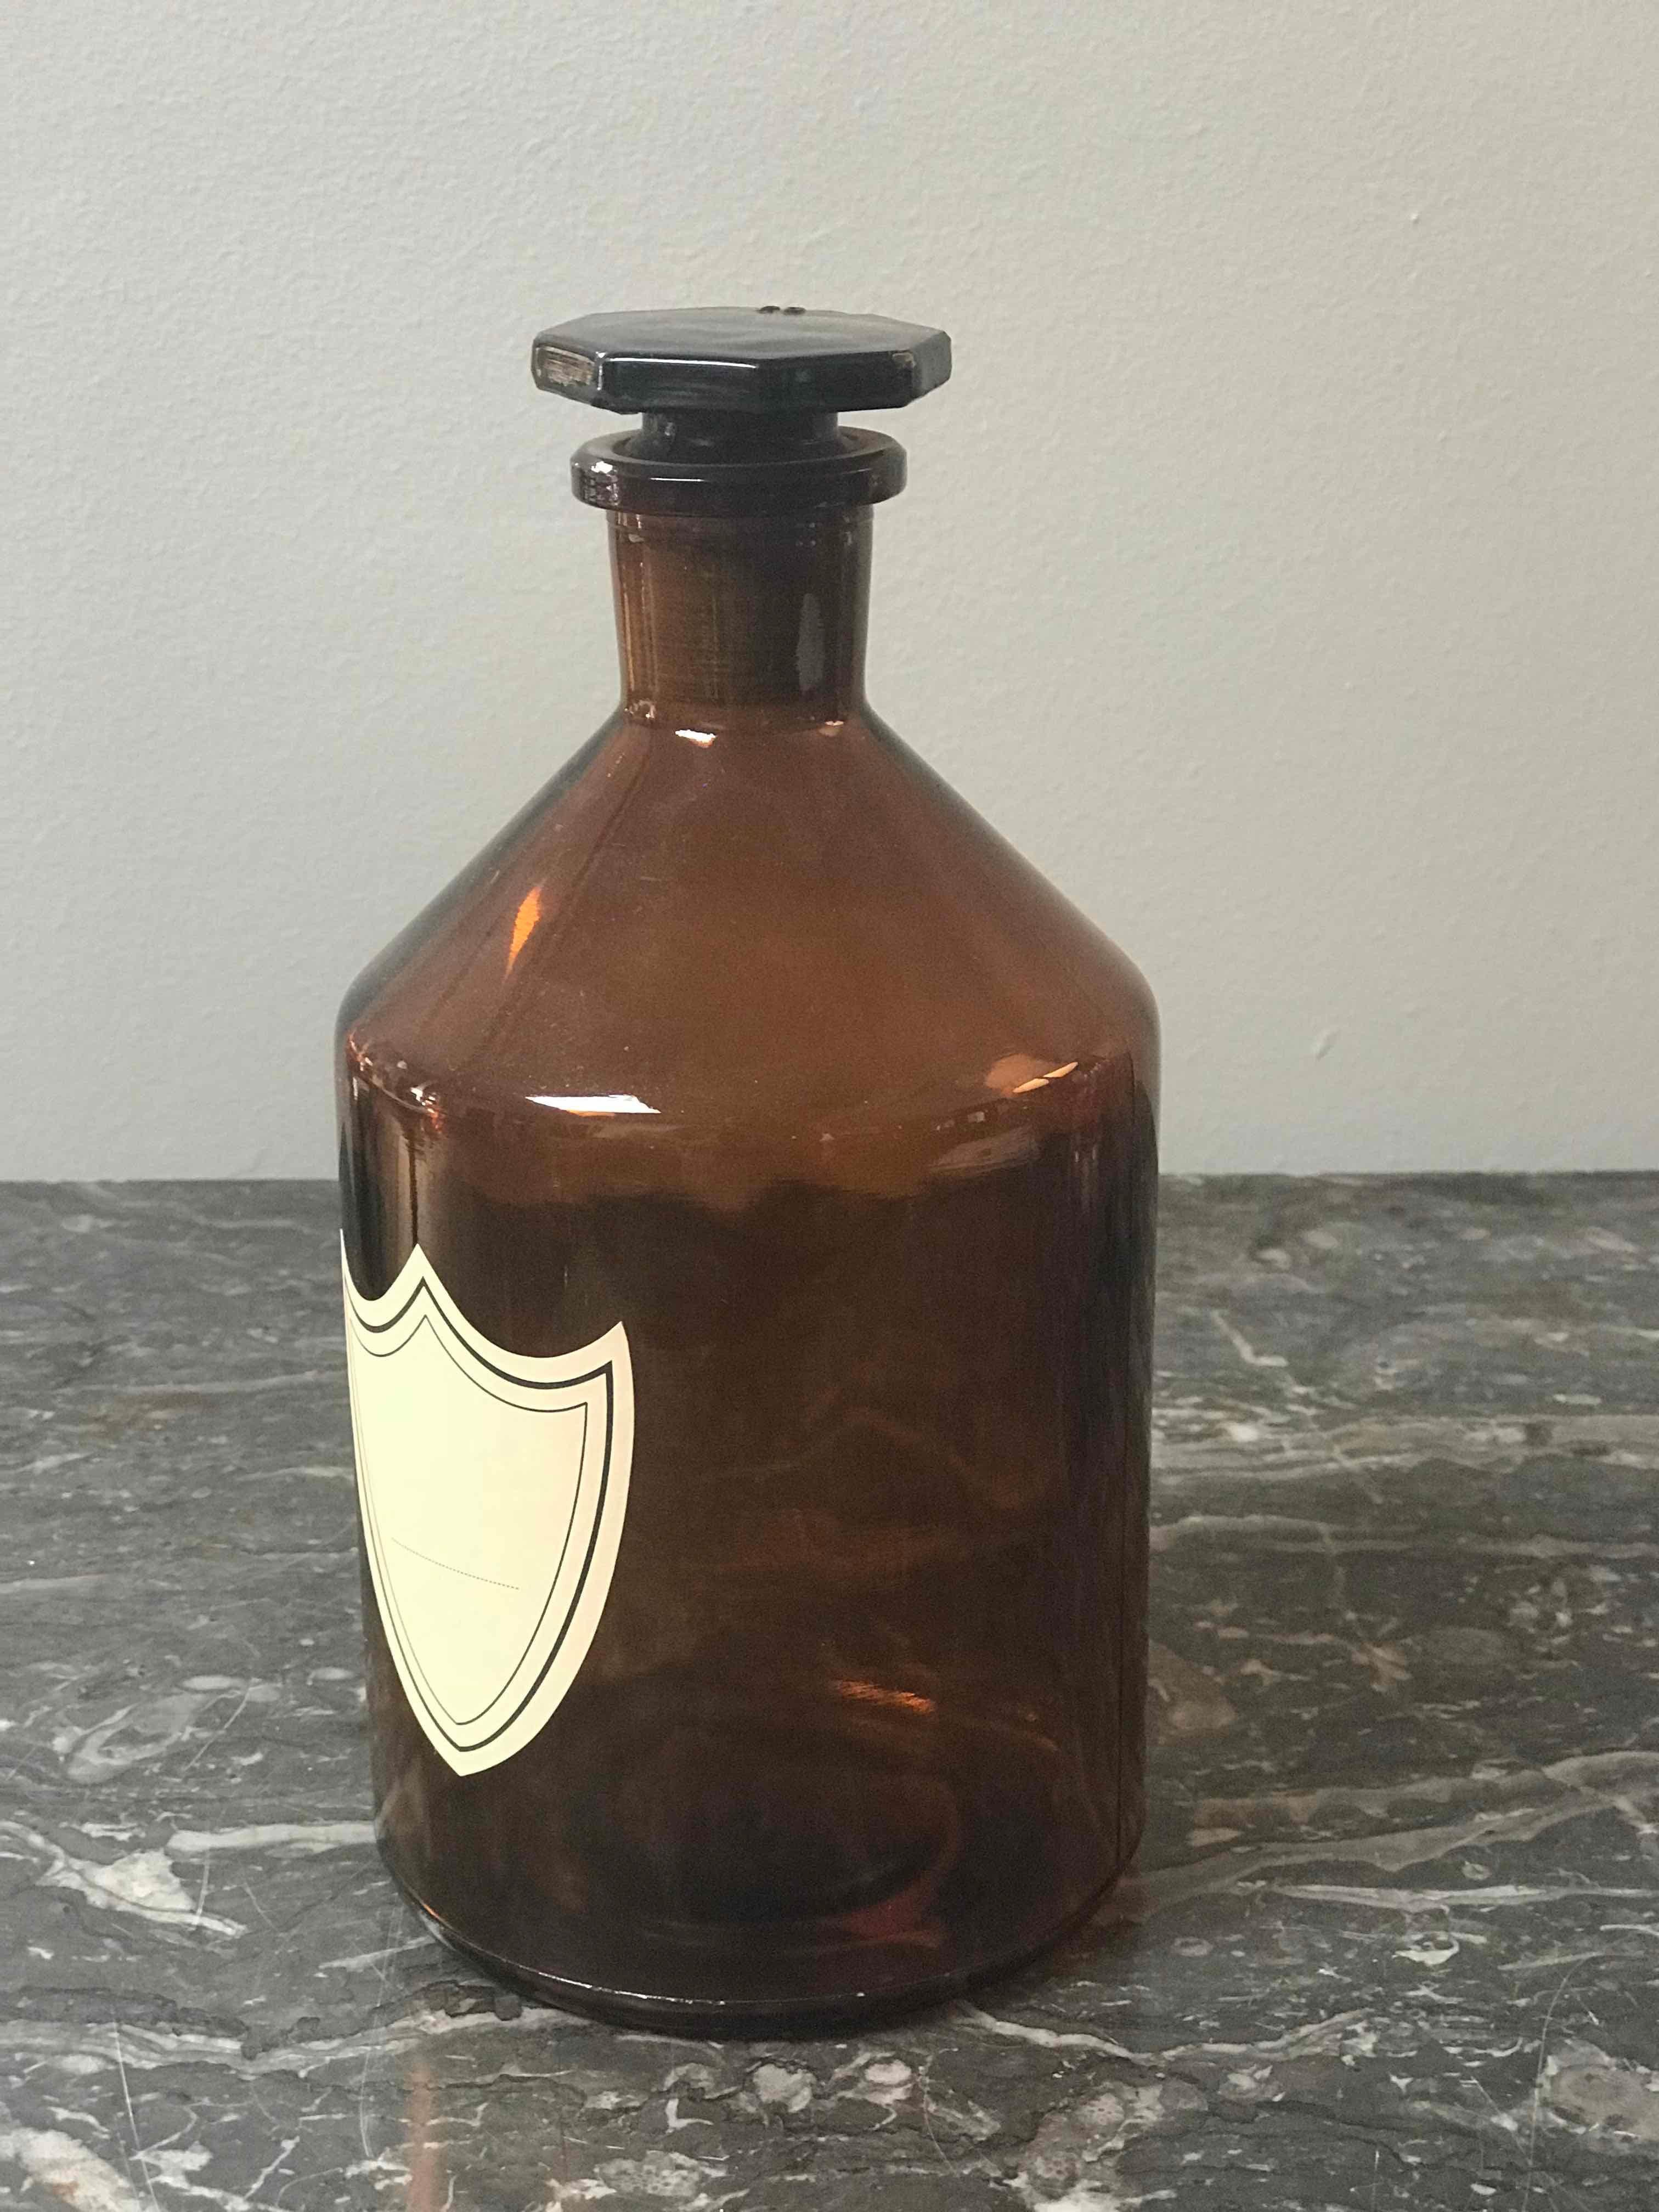 Amber glass apothecary bottle from England circa 1900. Each bottle has a blank cream colored label in the shape of a shield or crest, and is circumscribed with a thin blue border. These are functional objects that could serve as beautiful decorative